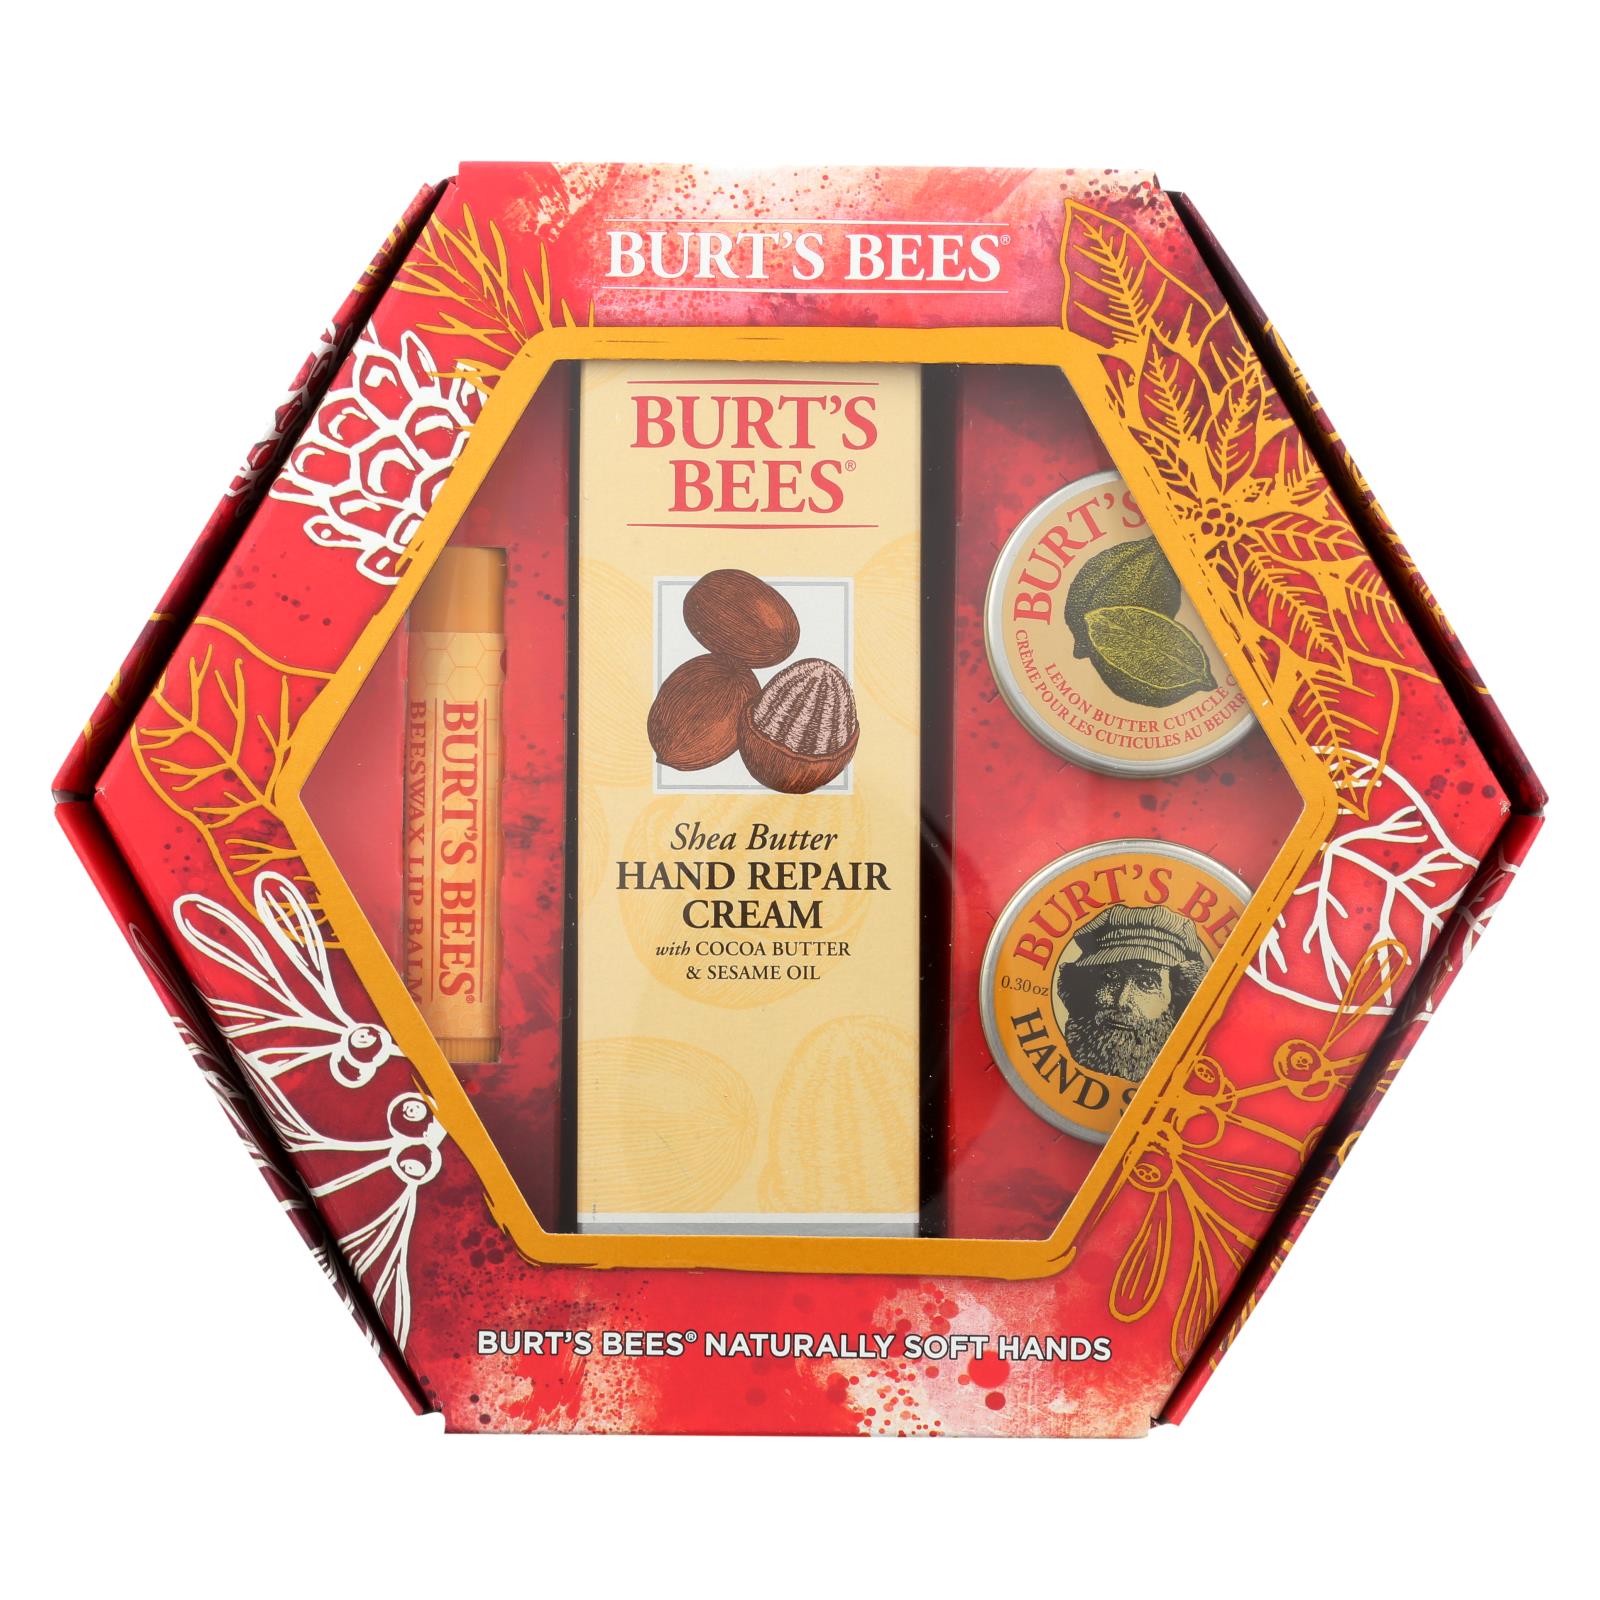 Burts Bees - Gift Pack Natural Soft Hands - Case of 4 - 1 CT